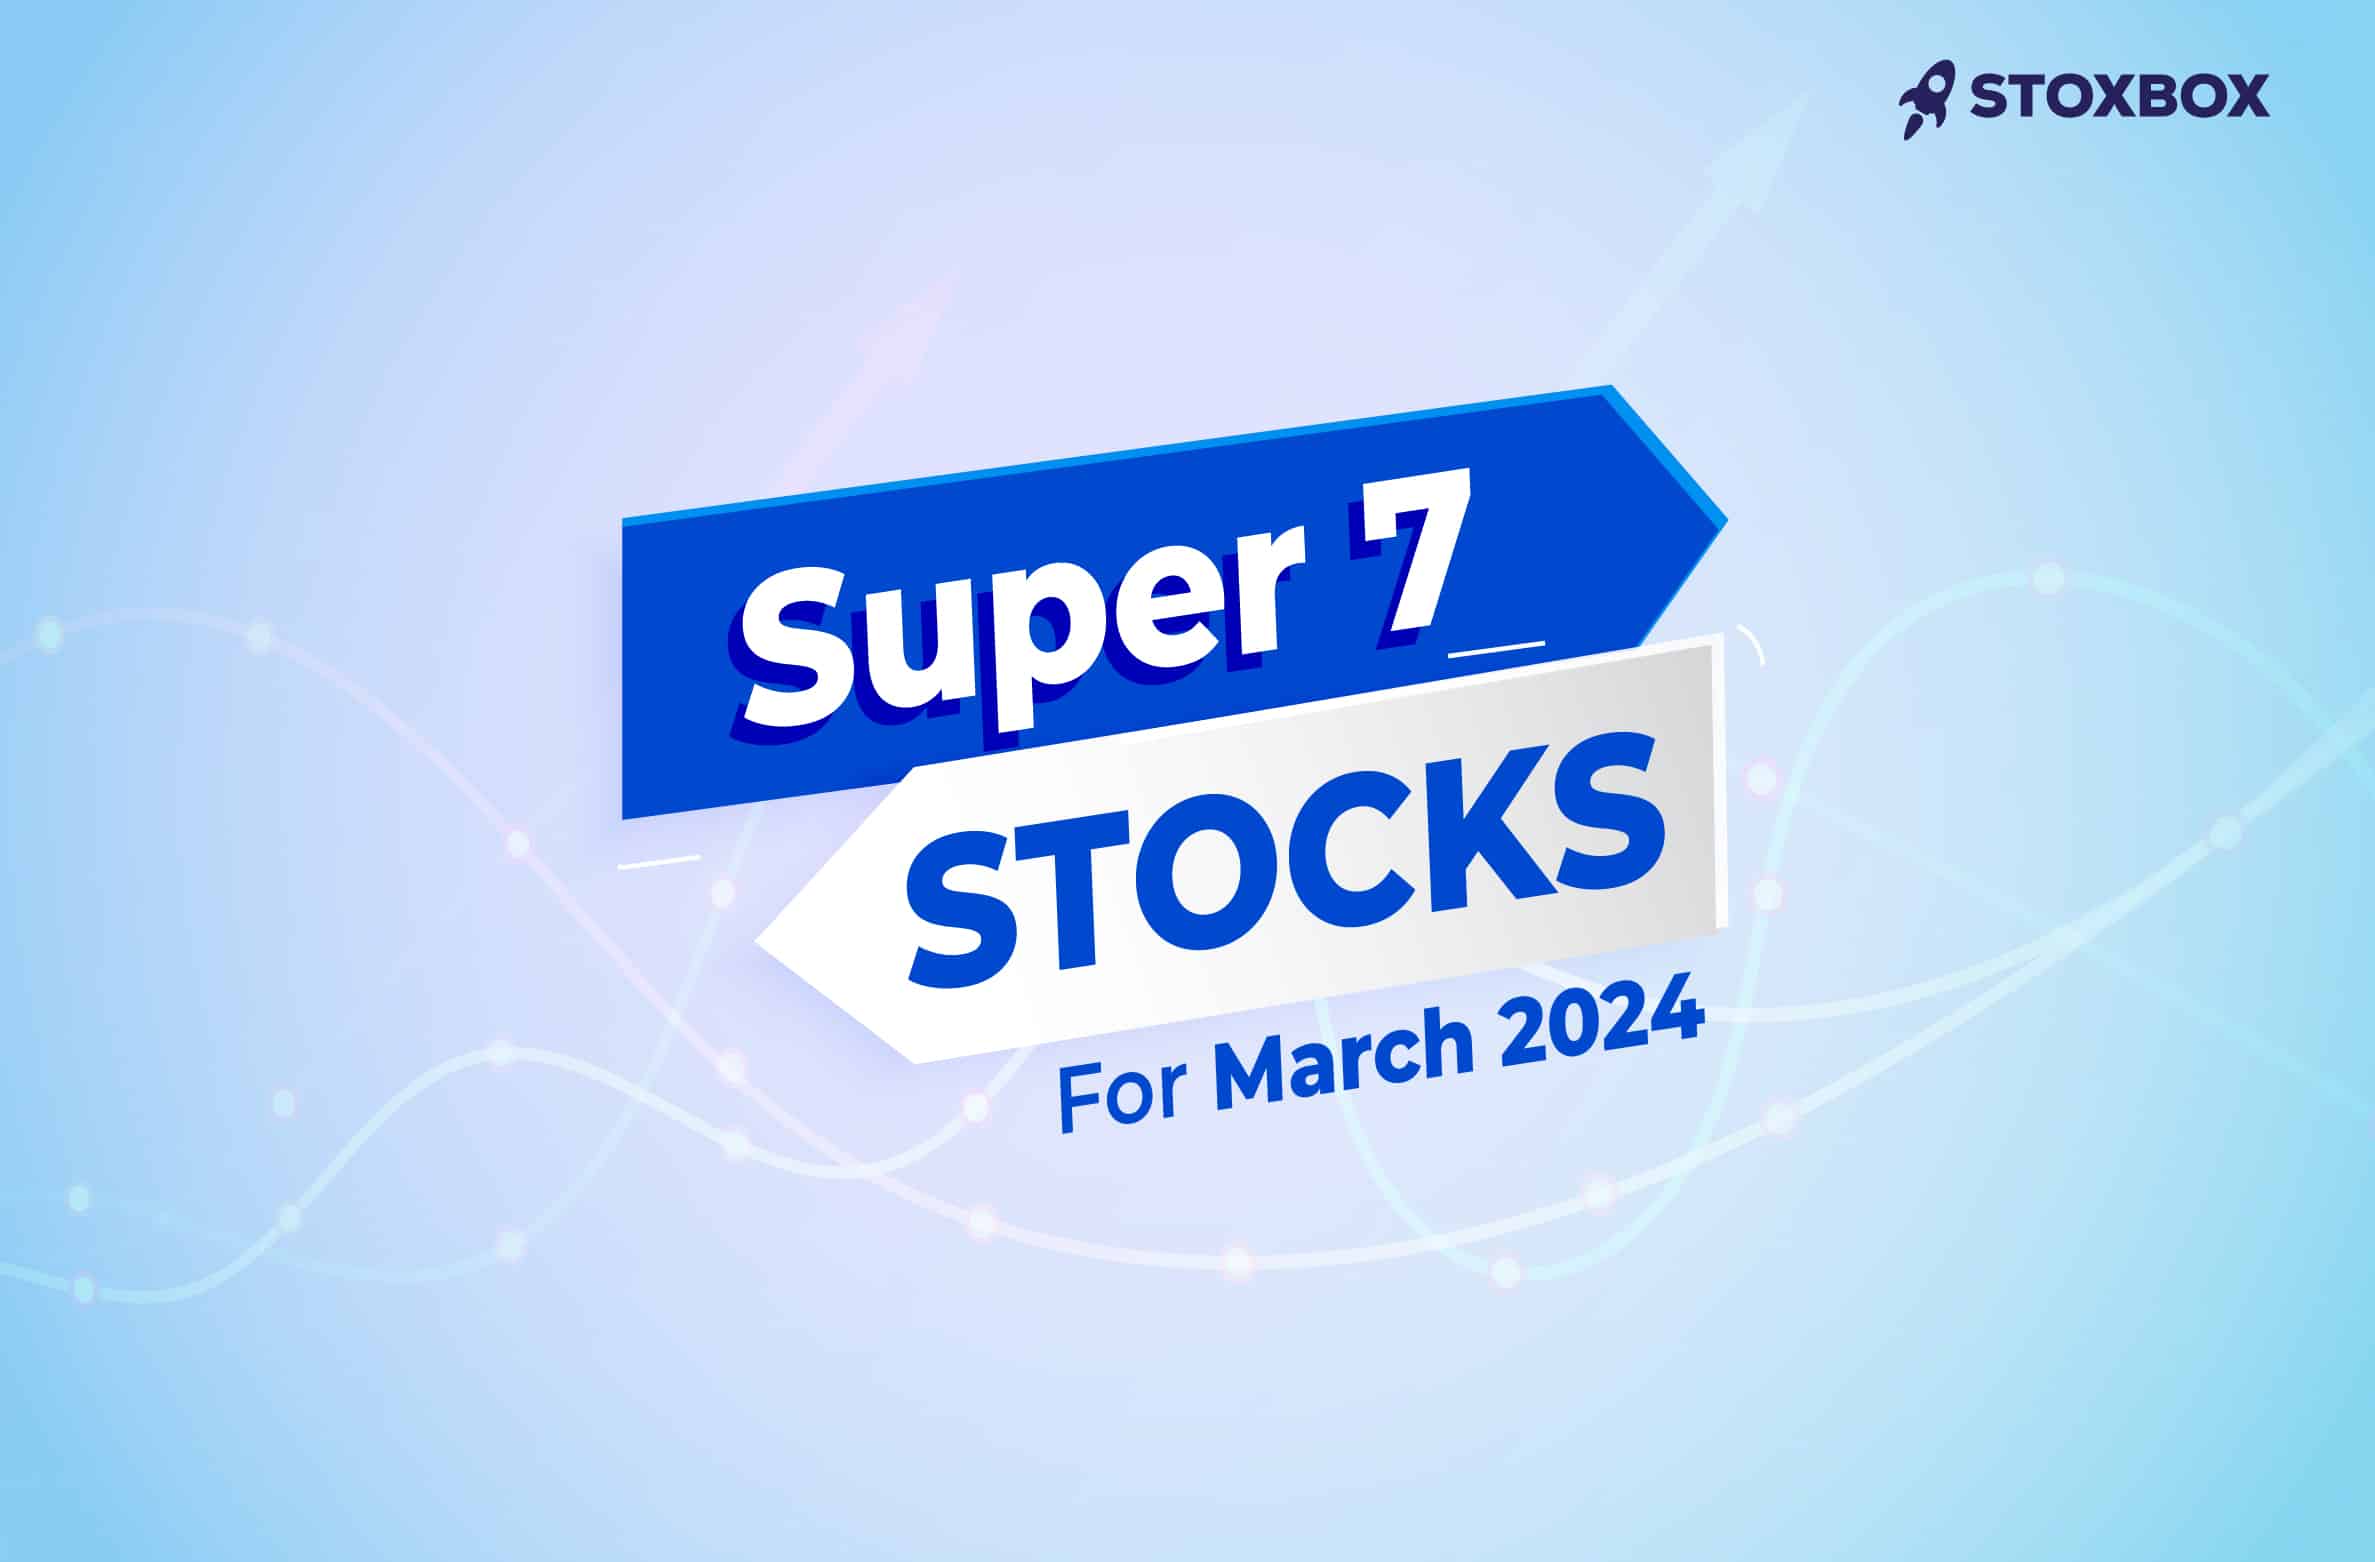 7 Super Stocks for March 2024 Invest Smartly